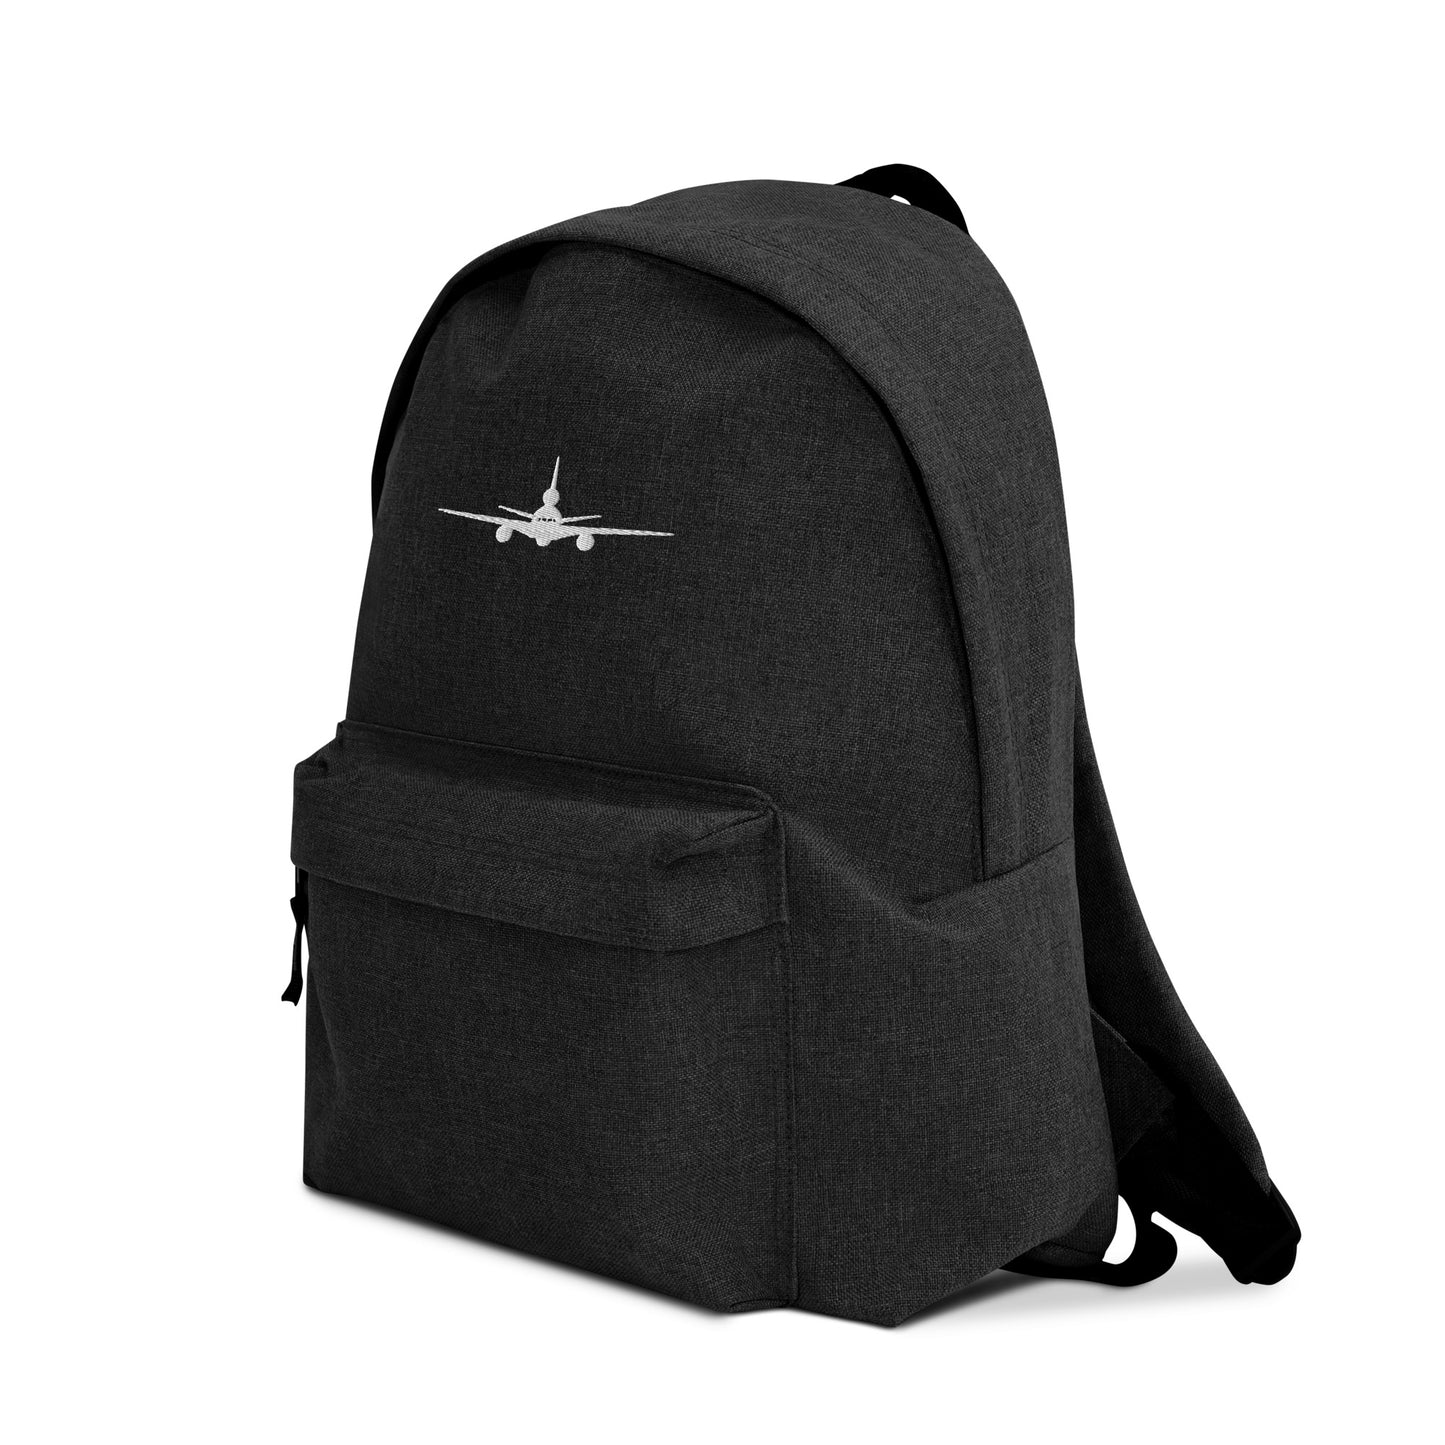 AerialFire DC-10 Embroidered Backpack